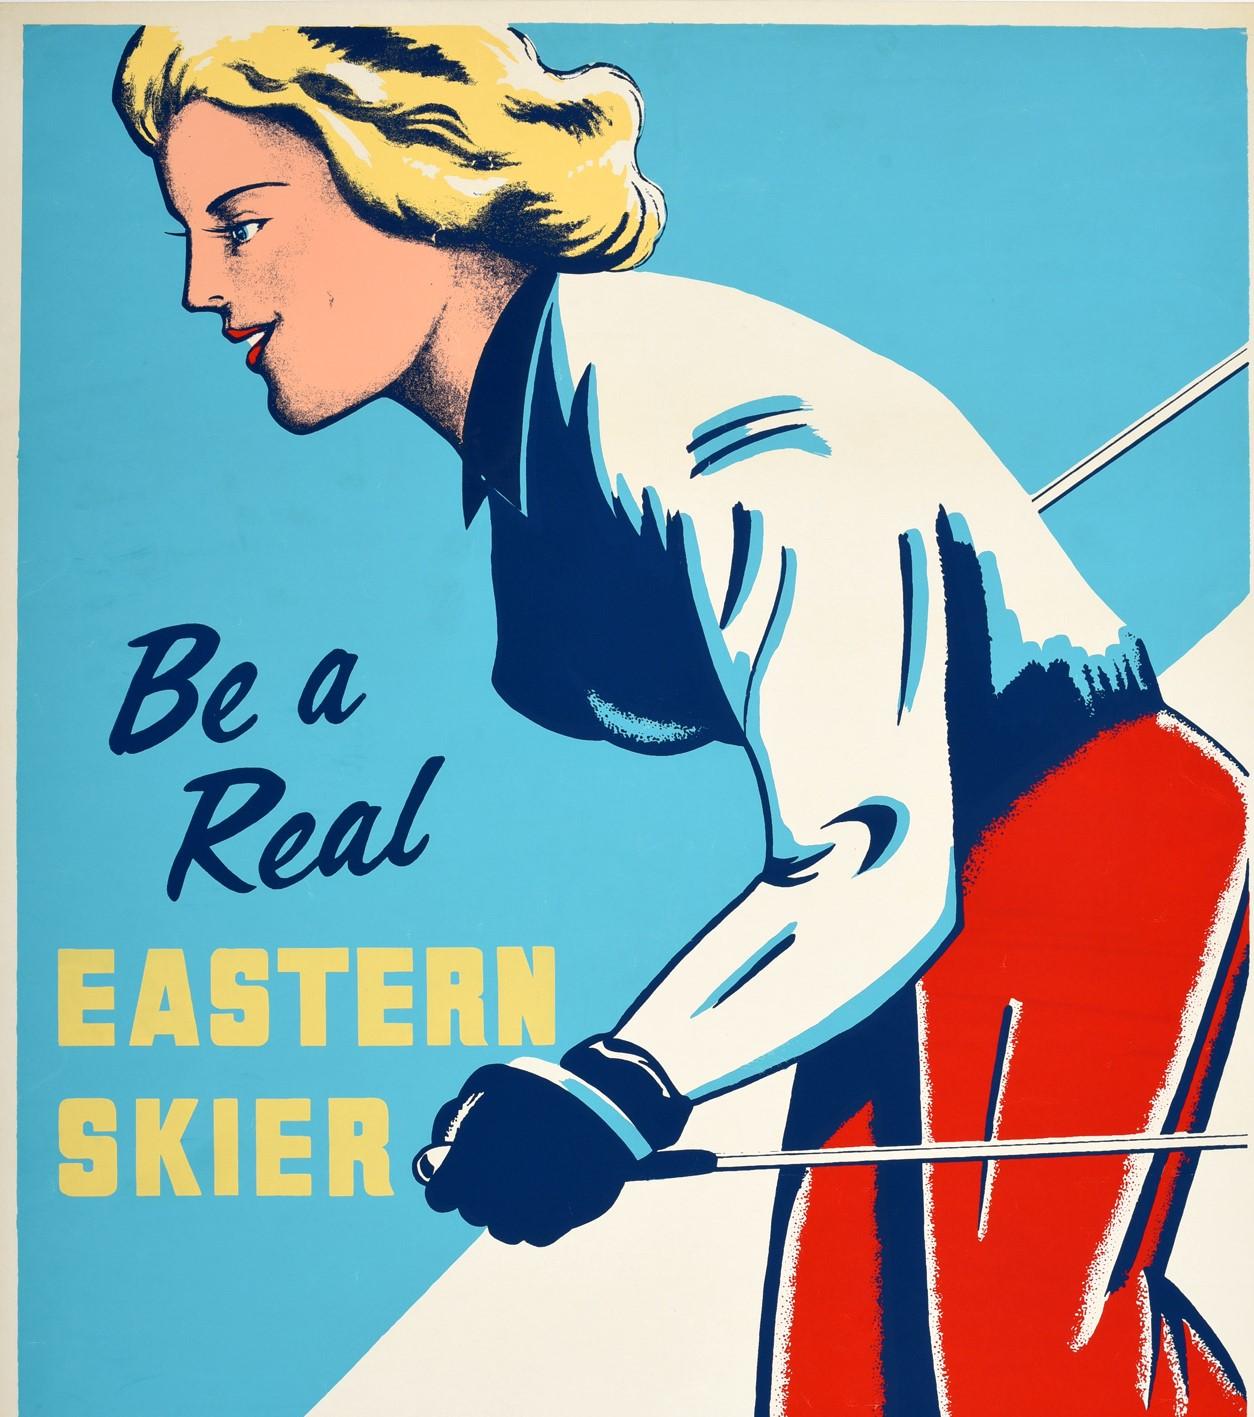 Original vintage American skiing poster - Be A Real Eastern Skier / Support USEASA United States Eastern Amateur Ski Association (founded 1922) - featuring a colourful image of a smiling lady wearing red ski trousers skiing down a snow white